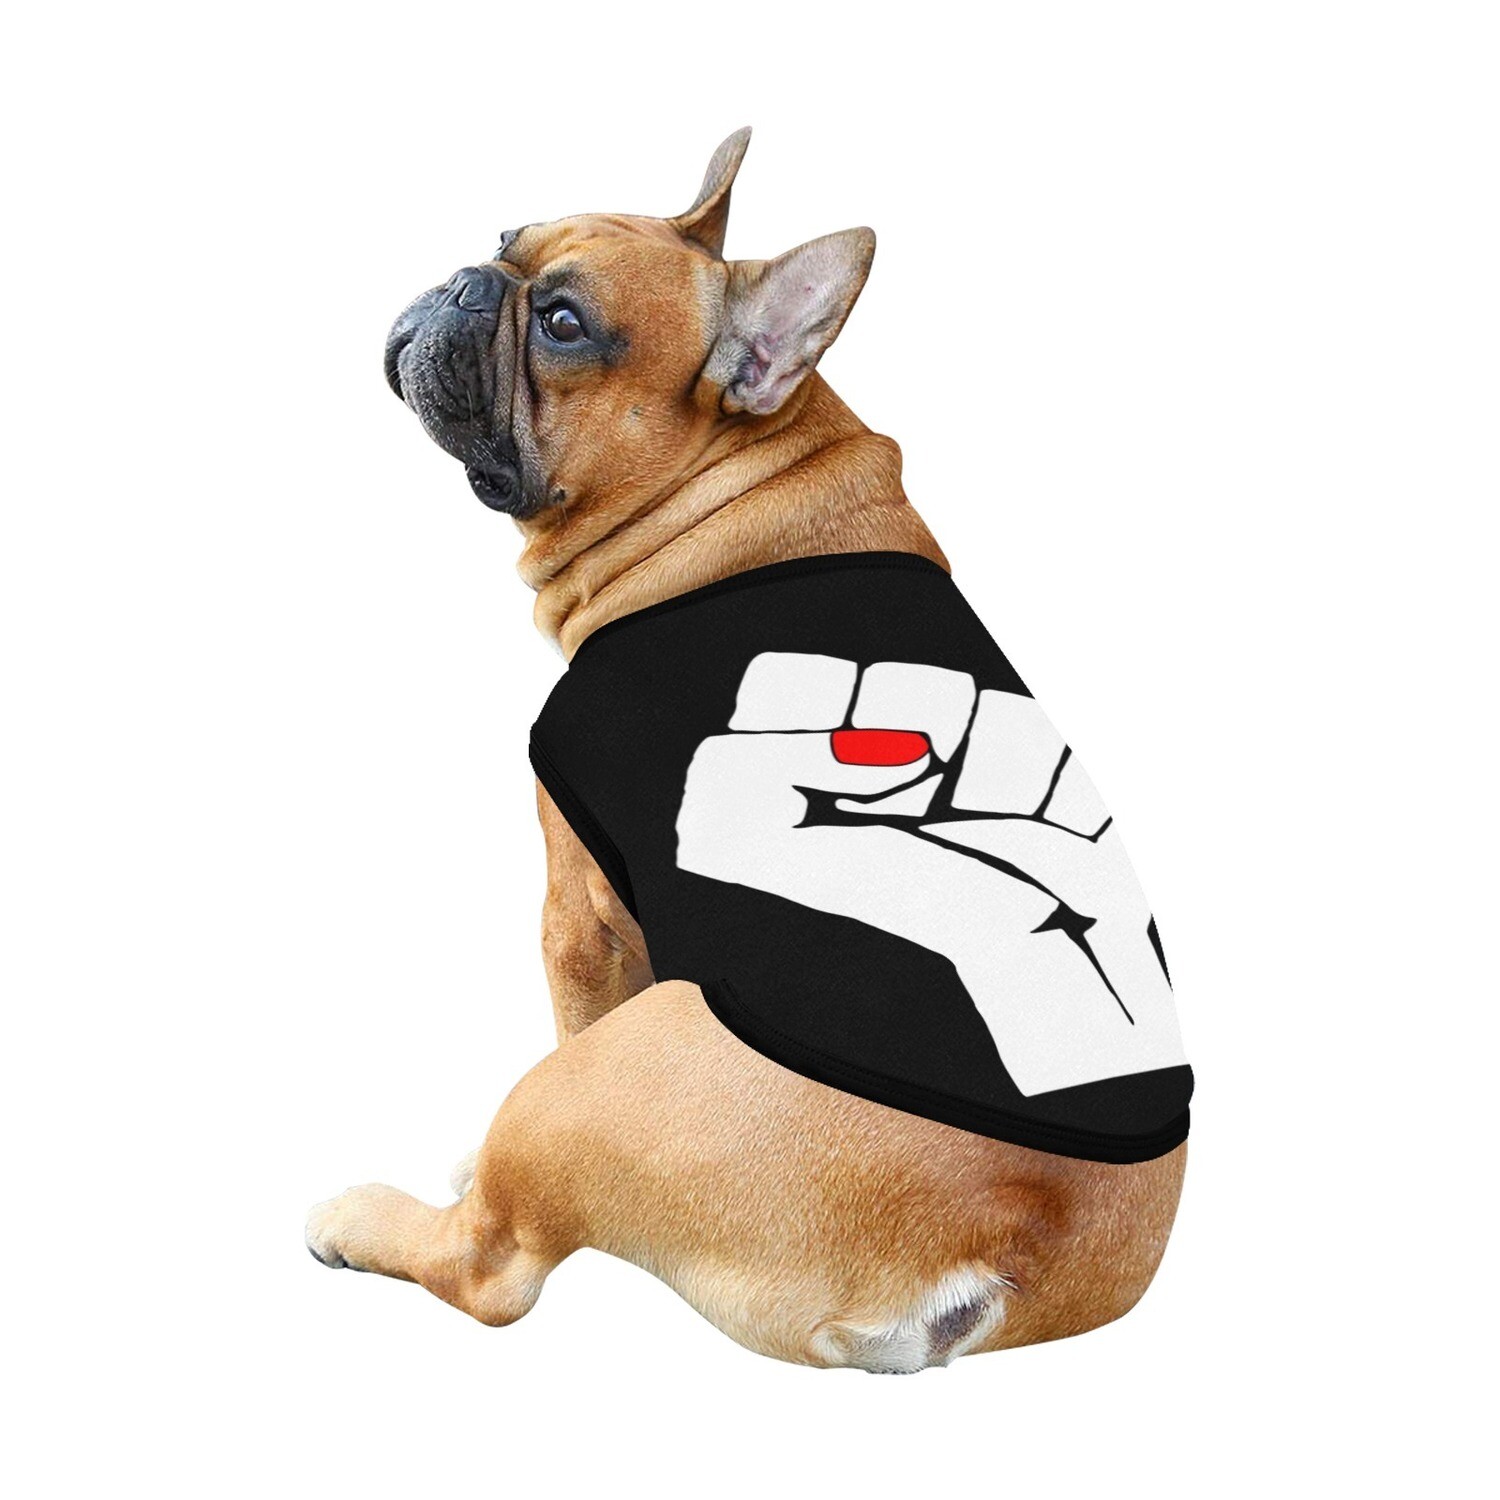 🐕 ✊🏽 Power fist red nails dog shirt, dog tank top, dog t-shirt, dog clothes, Gift, 7 sizes XS to 3XL, get loud, empowerment, raised fist